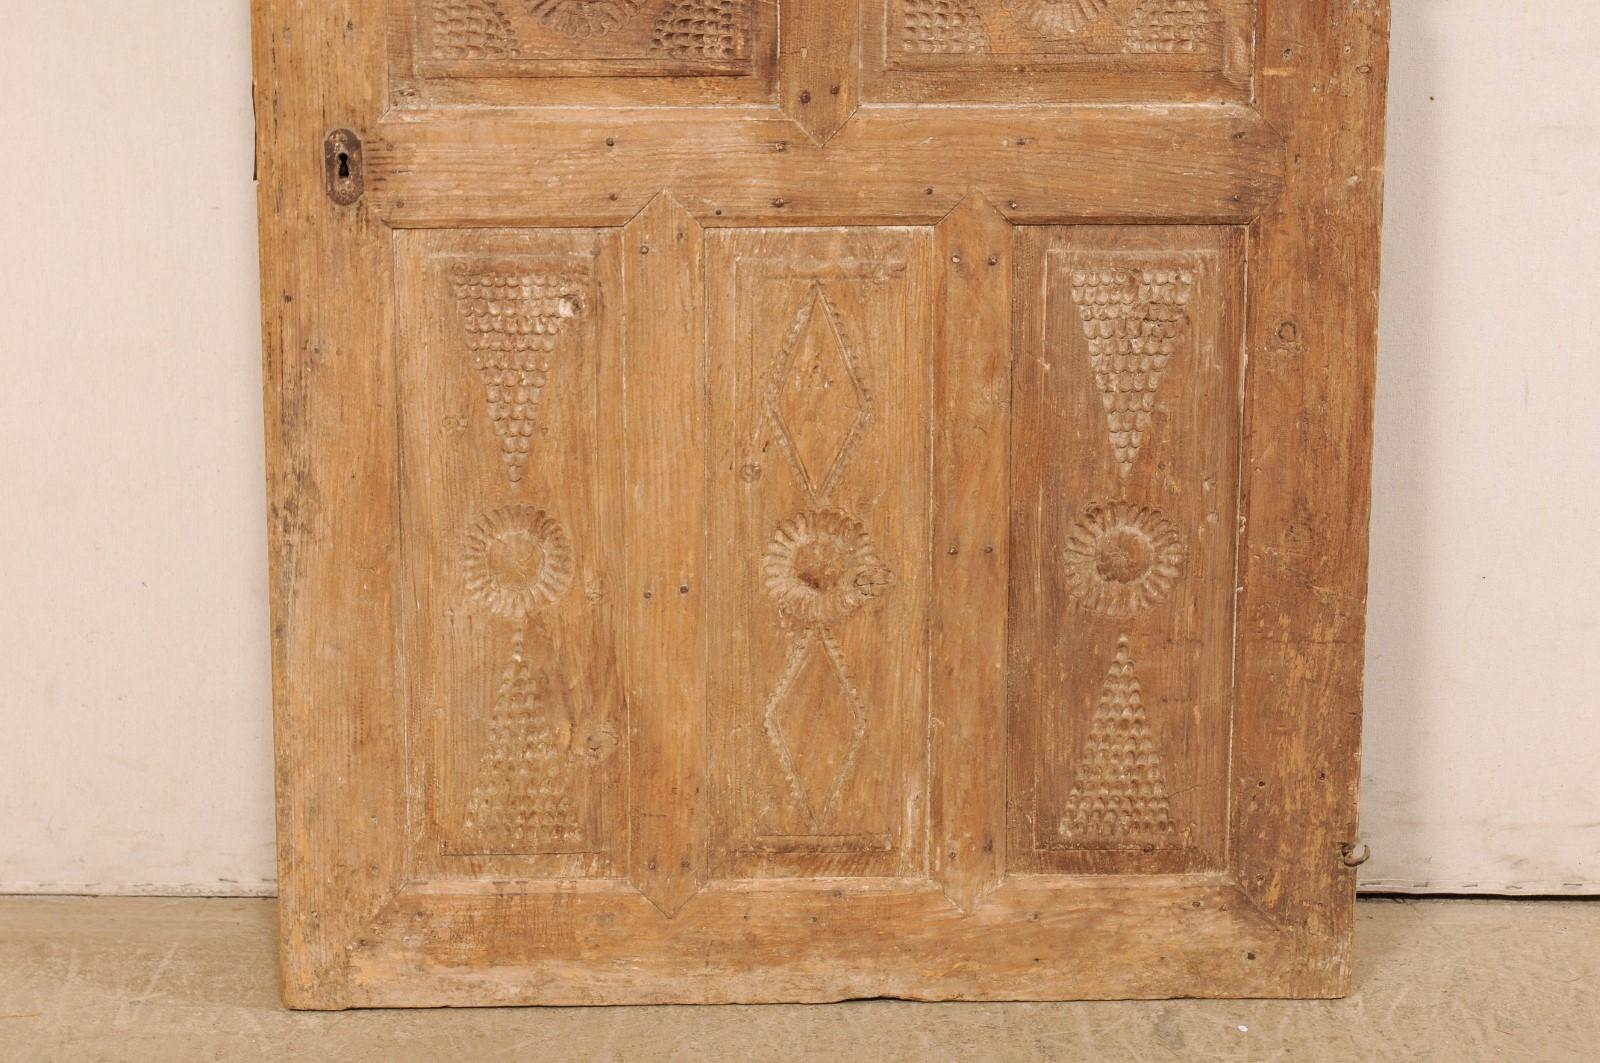 19th Century 19th C. Turkish Decoratively-Carved Wood Raised Panel Dooor For Sale